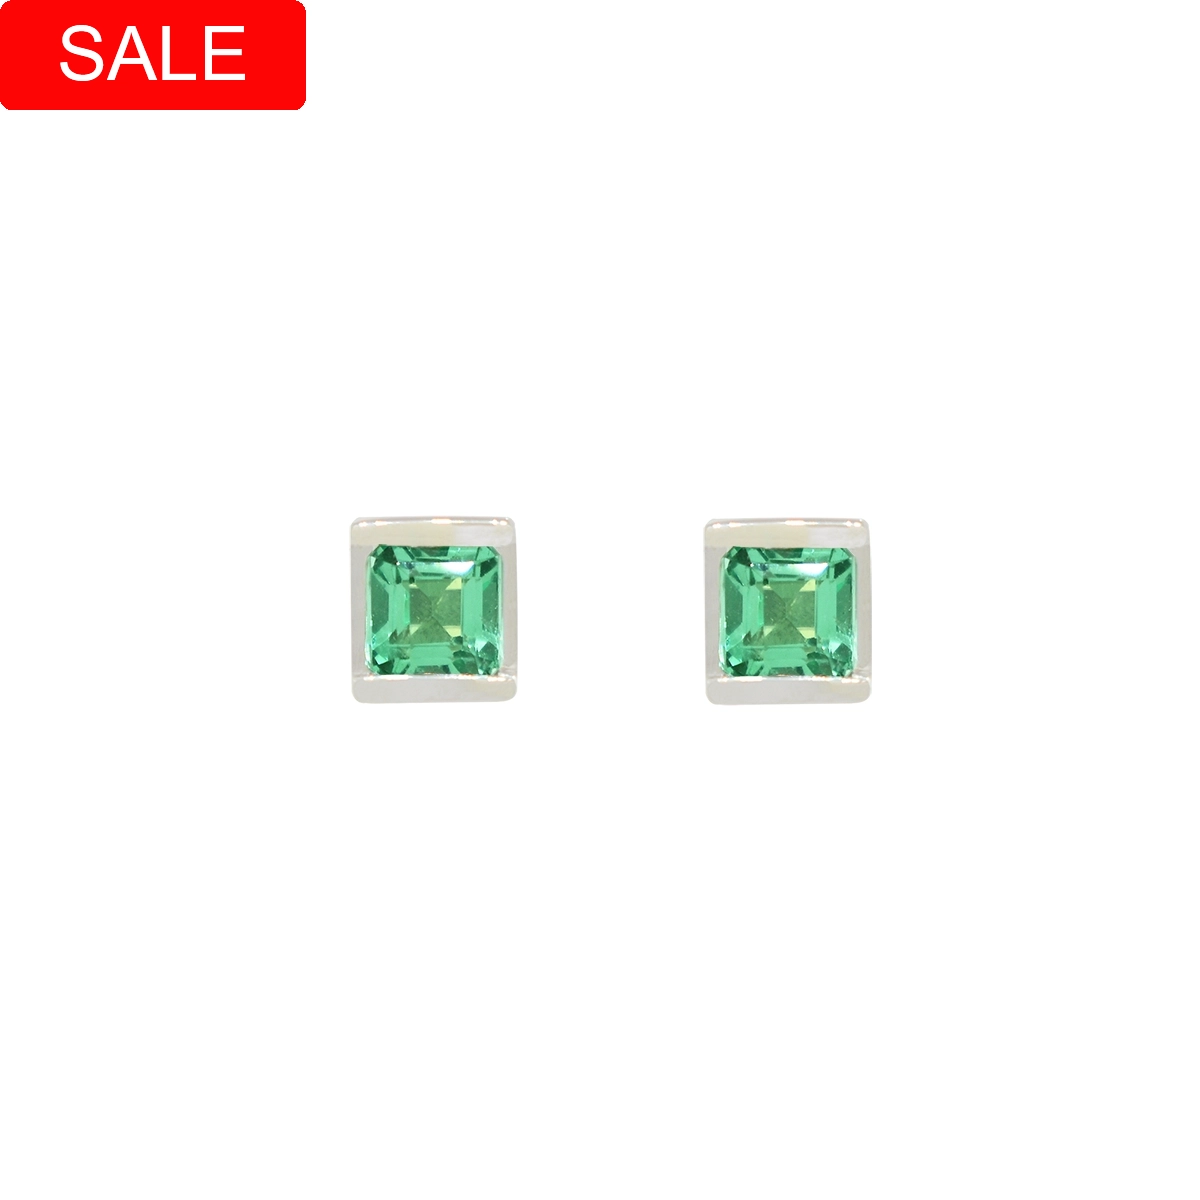 Rectangular stud earrings in white gold with 2 genuine emerald-cut natural Colombian emeralds in 0.61 Ct. t.w.